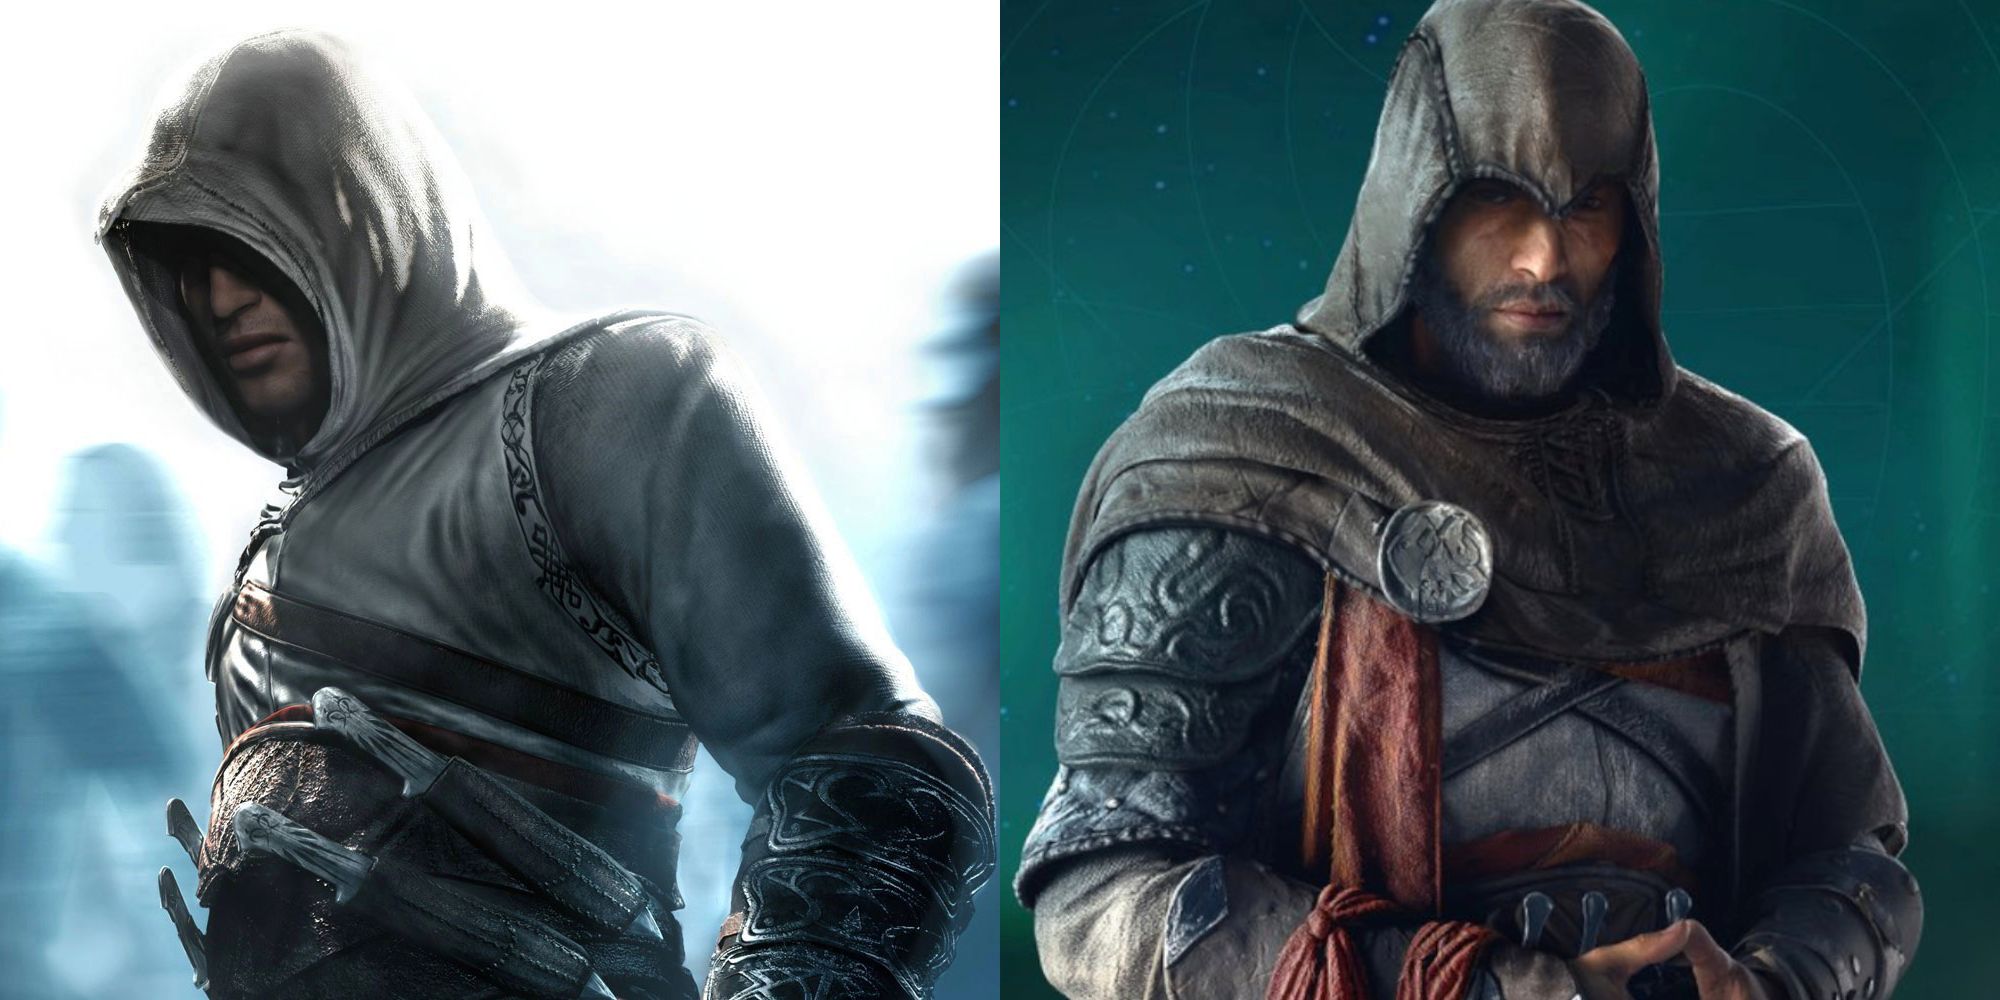 altair and basim side by side